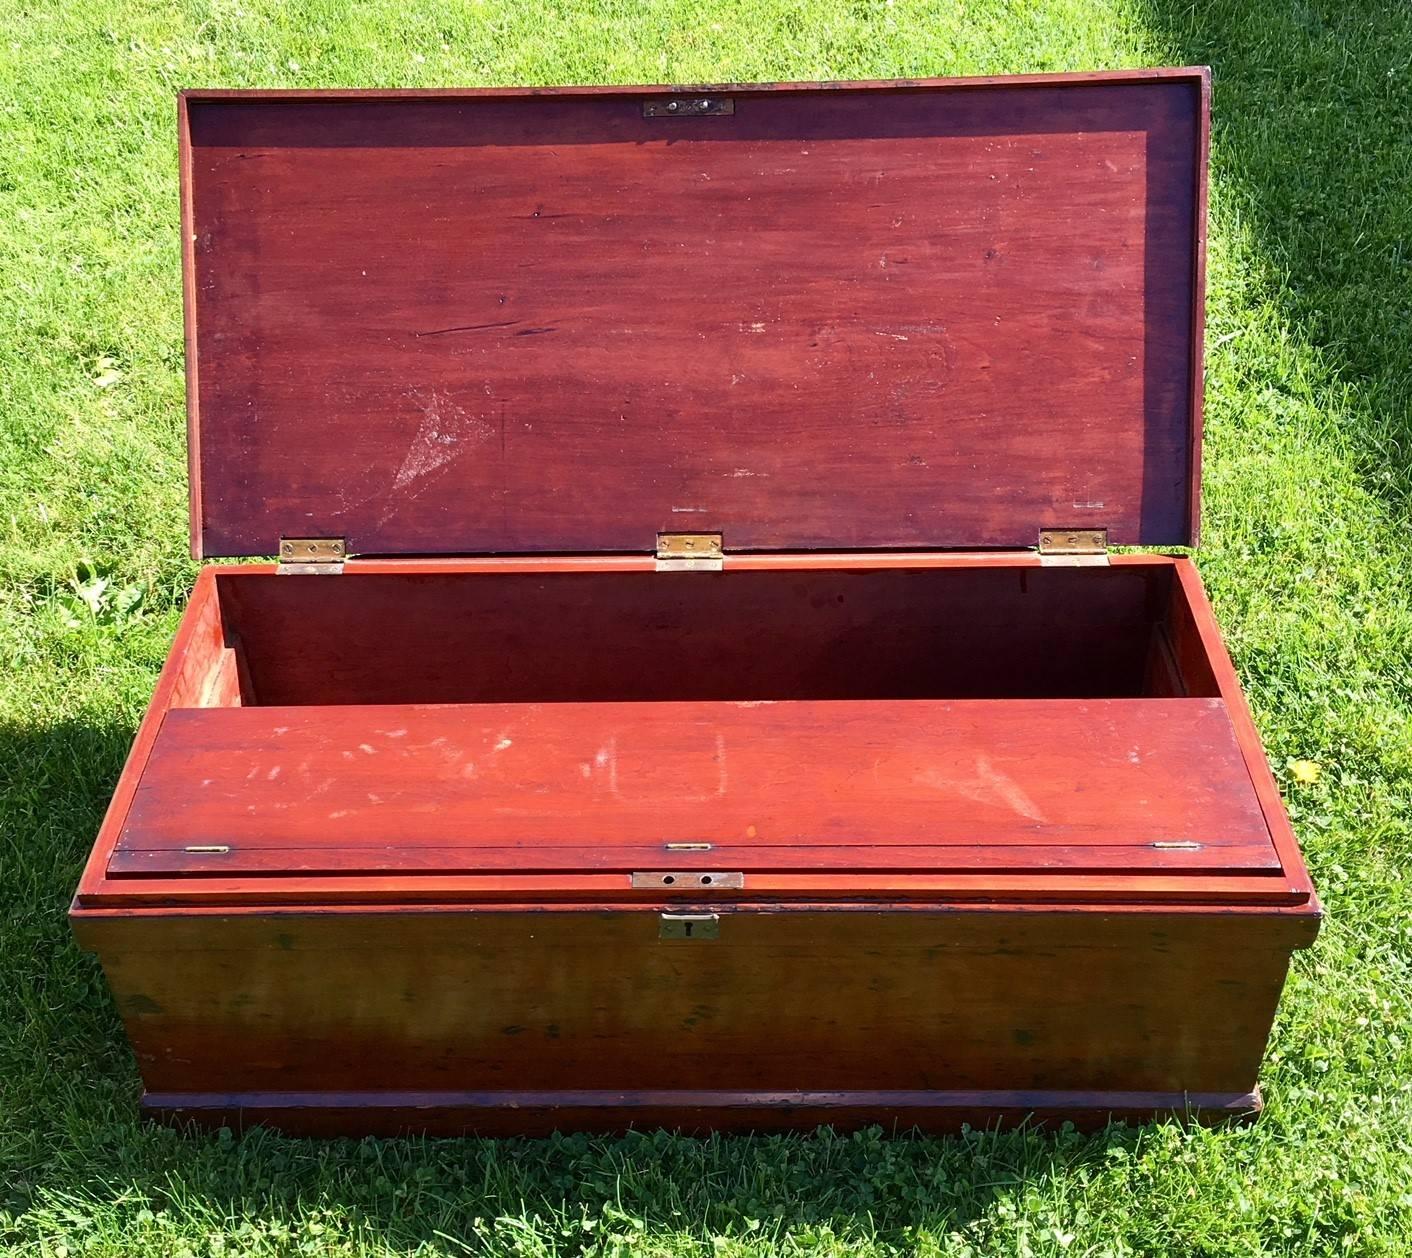 19th century English cherry raised panel tool chest, circa 1870, a fine quality rectangular six board chest, having a lid with a deep relief raised panel, original brass hinges and side bail handles, and fitted interior with a series of sliding